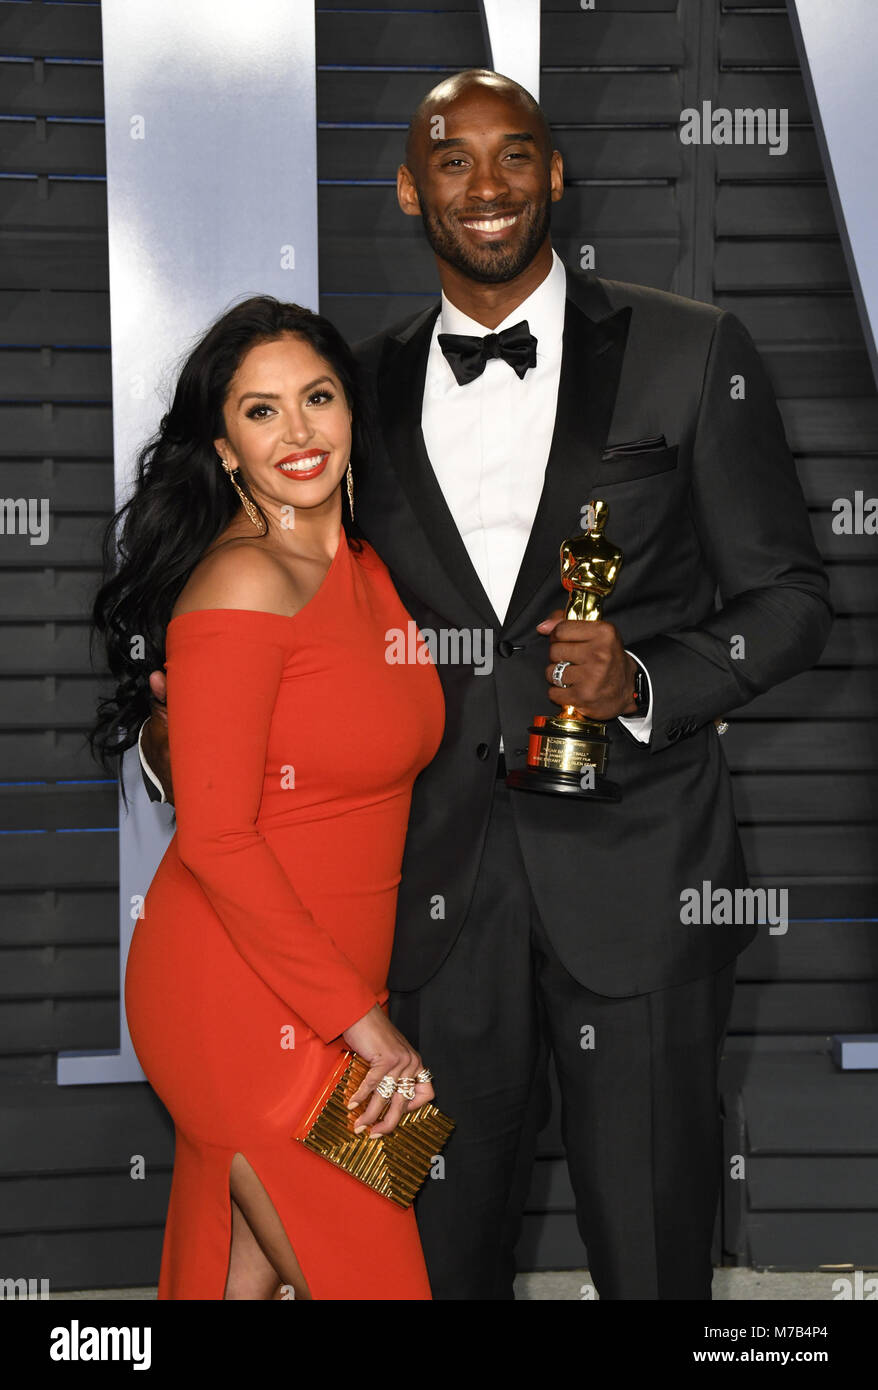 Kobe Bryant's Wife Vanessa Gives Birth, Welcomes 4th Daughter